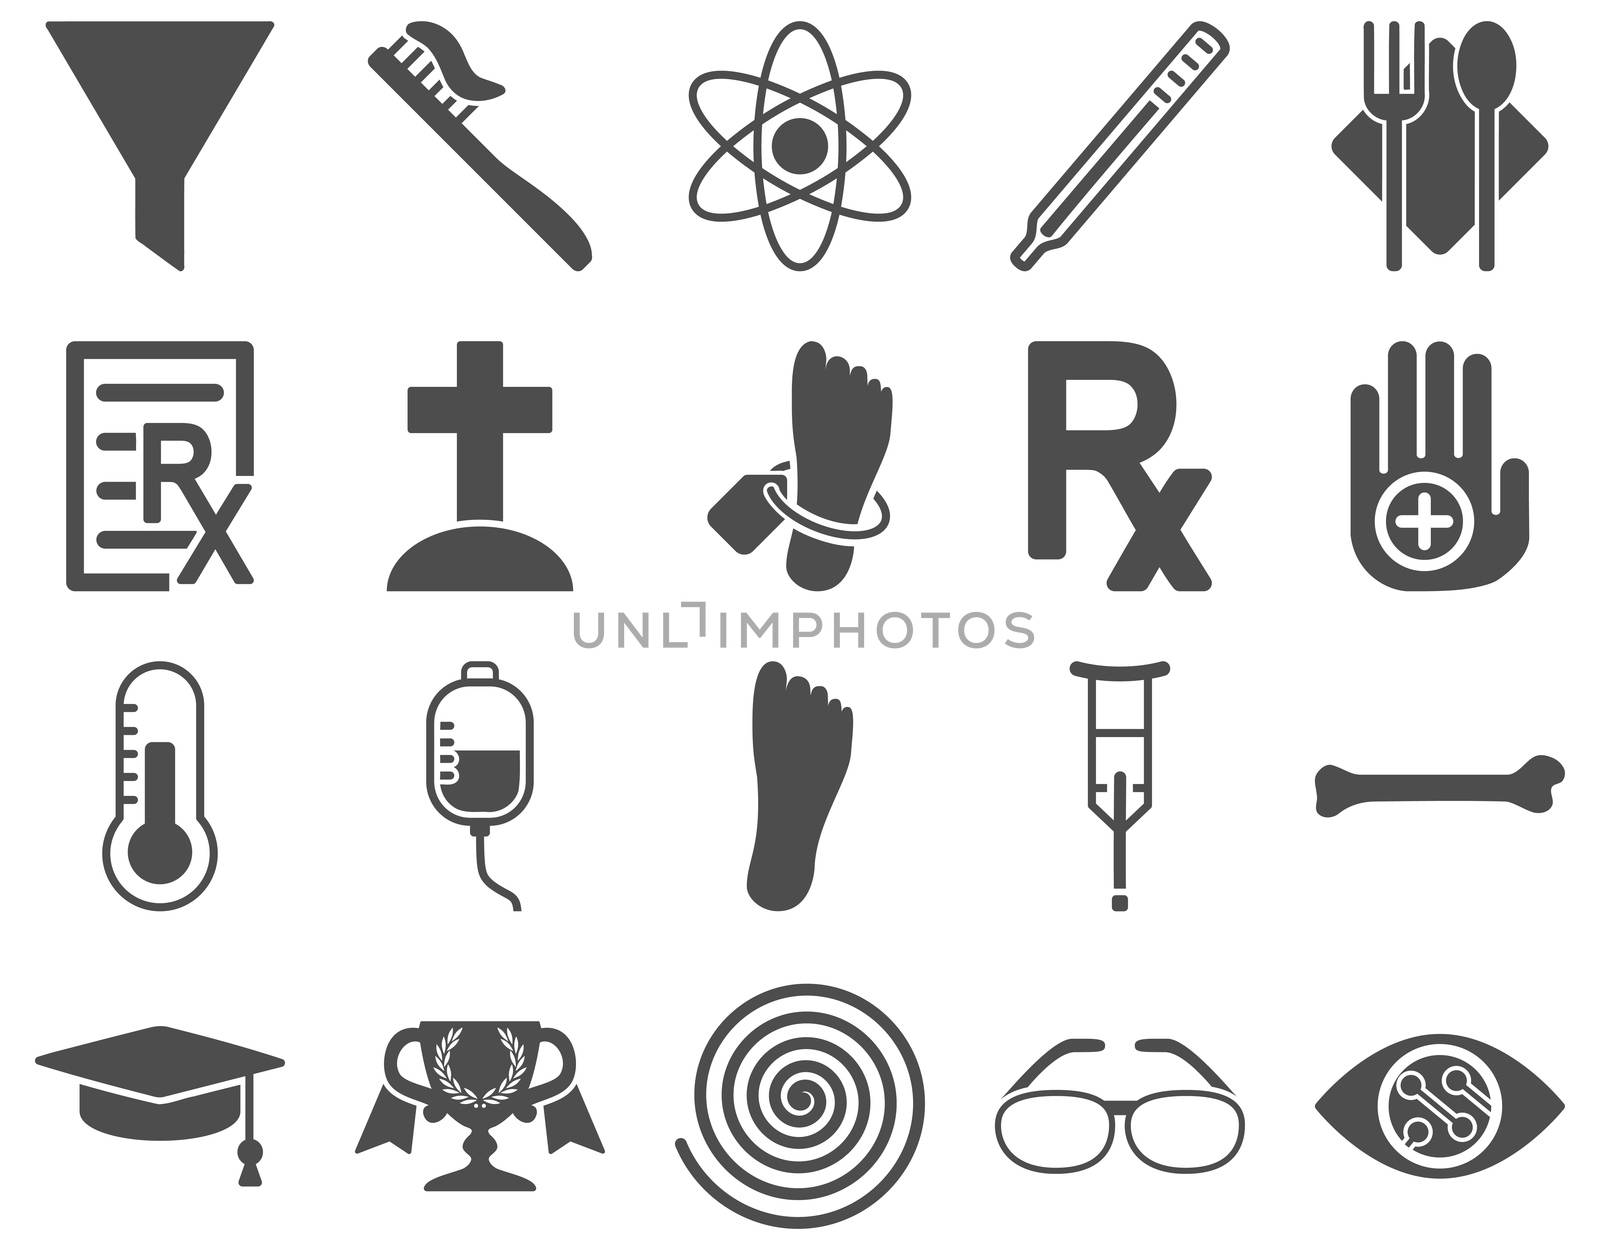 Medical icon set. Style: icons drawn with gray color on a white background.